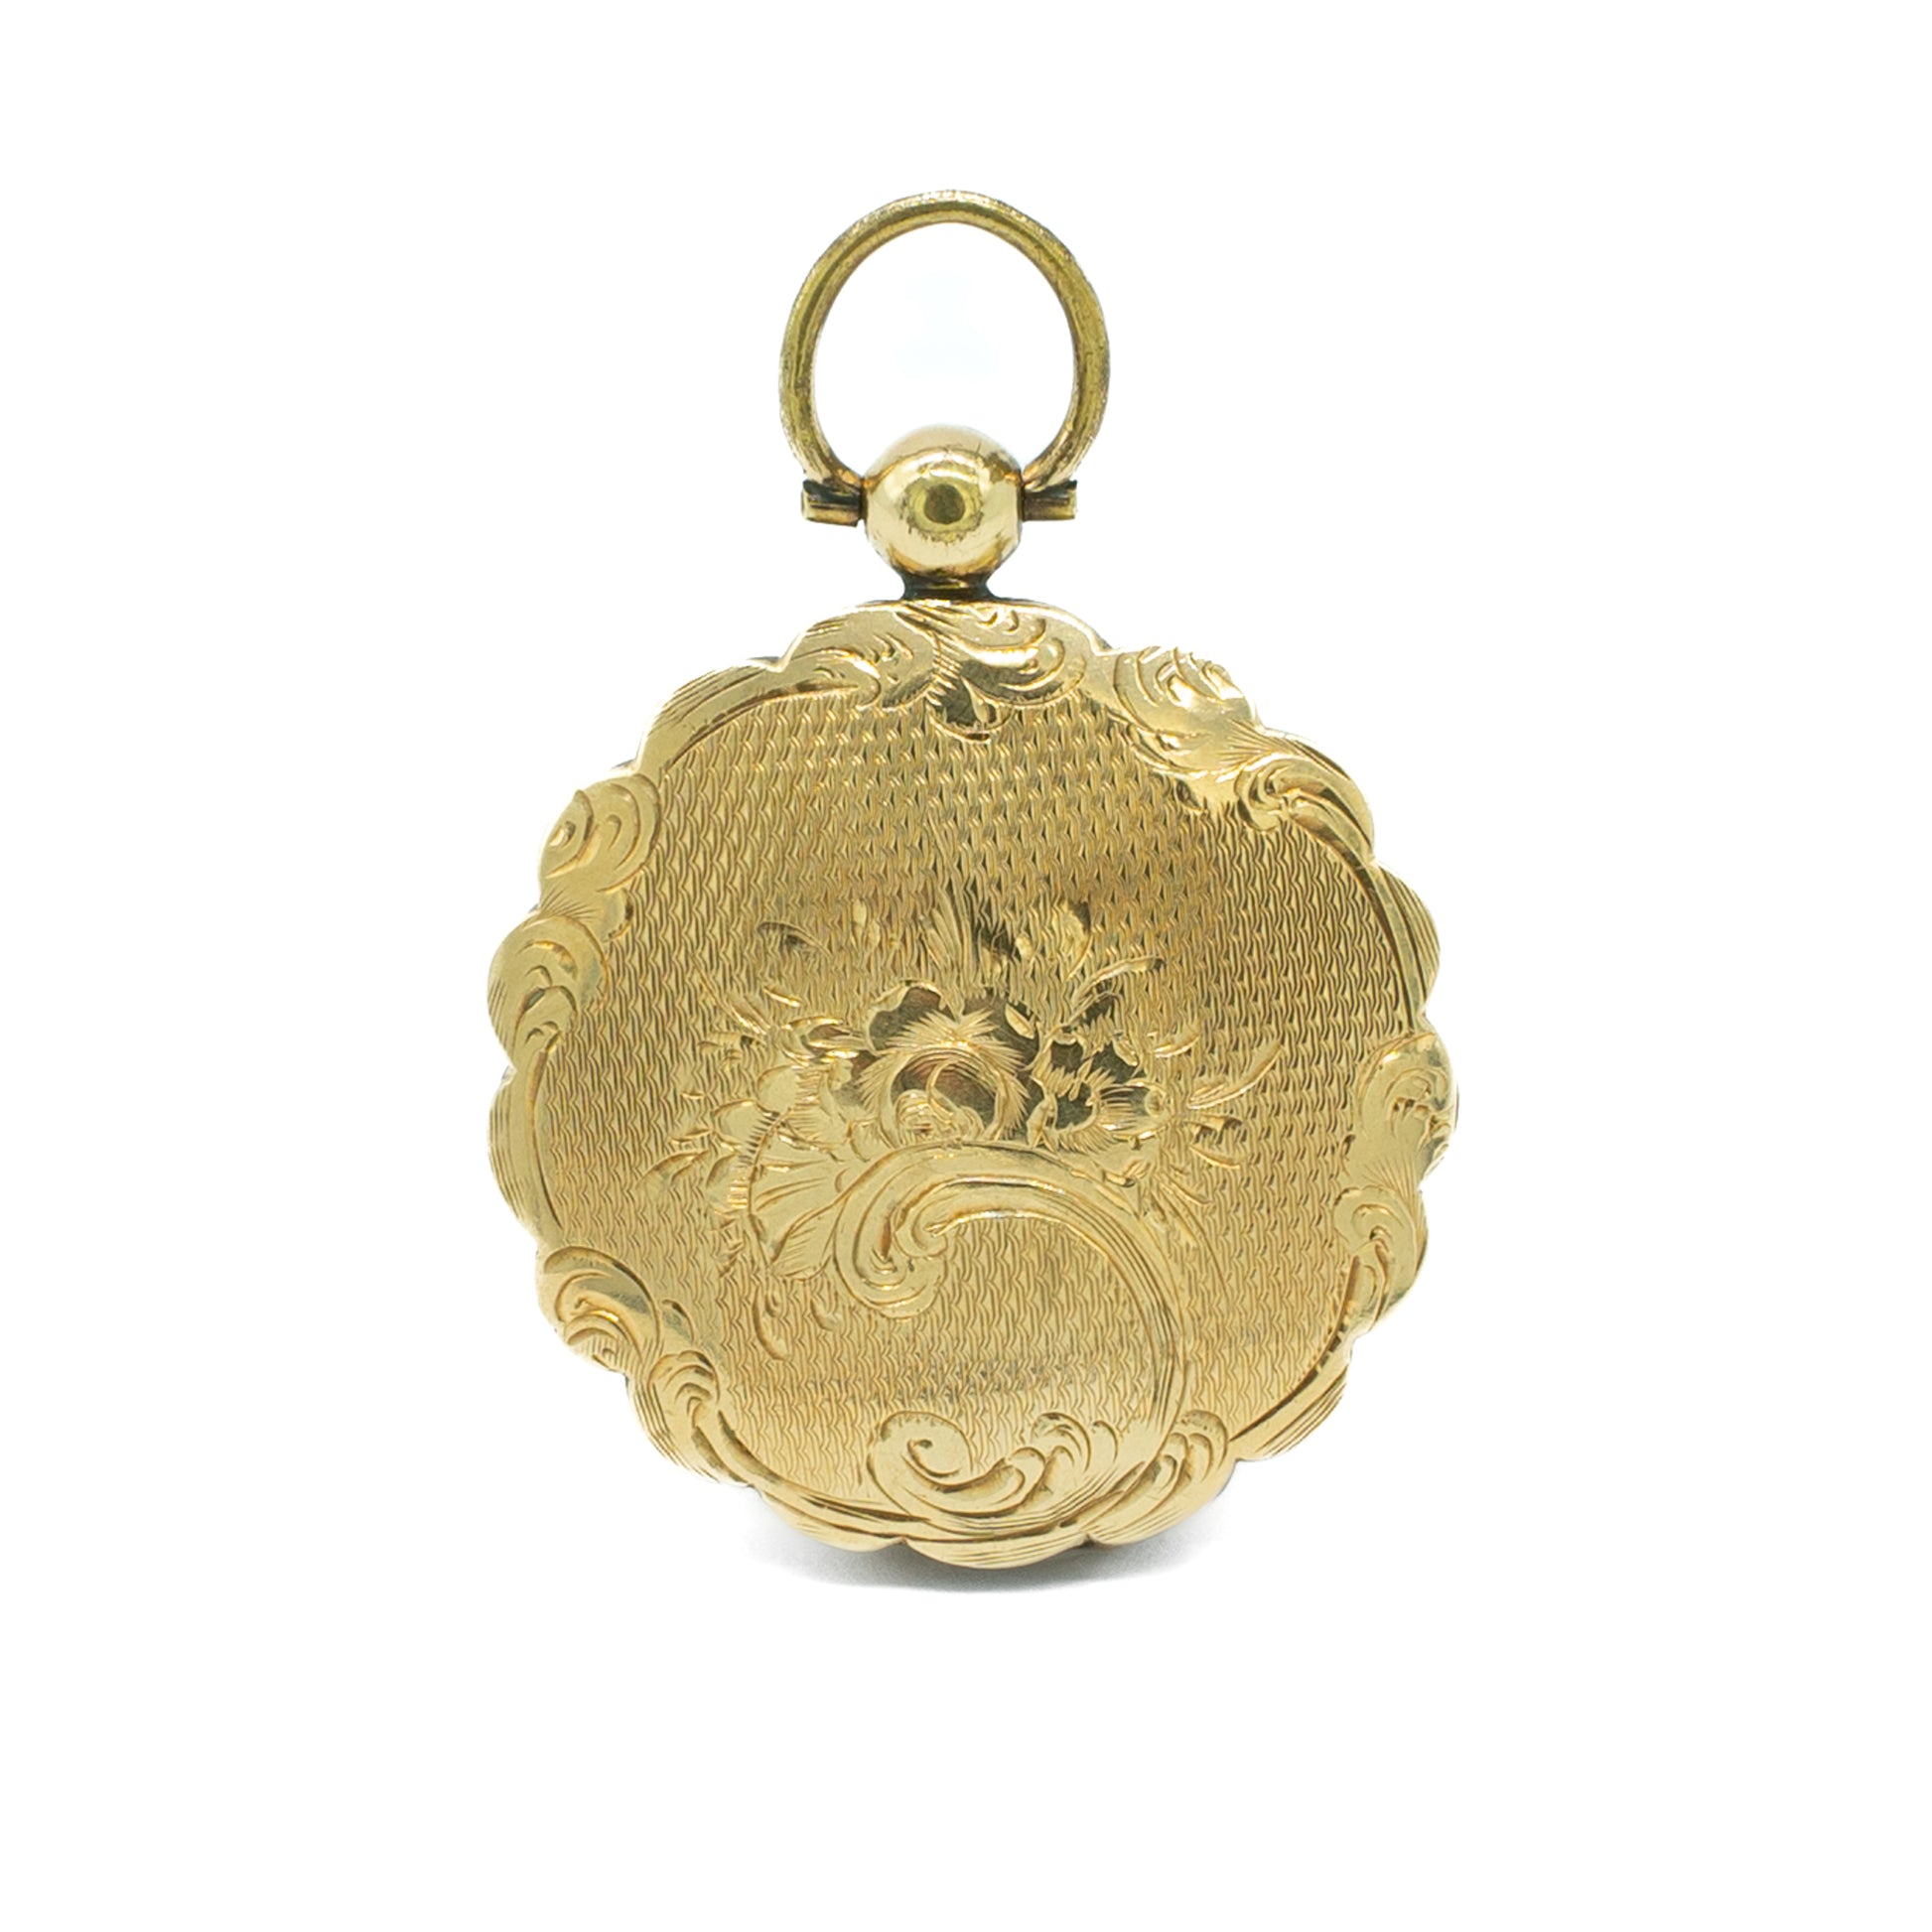 Pretty Victorian gold cased pendant with beautiful engraving.